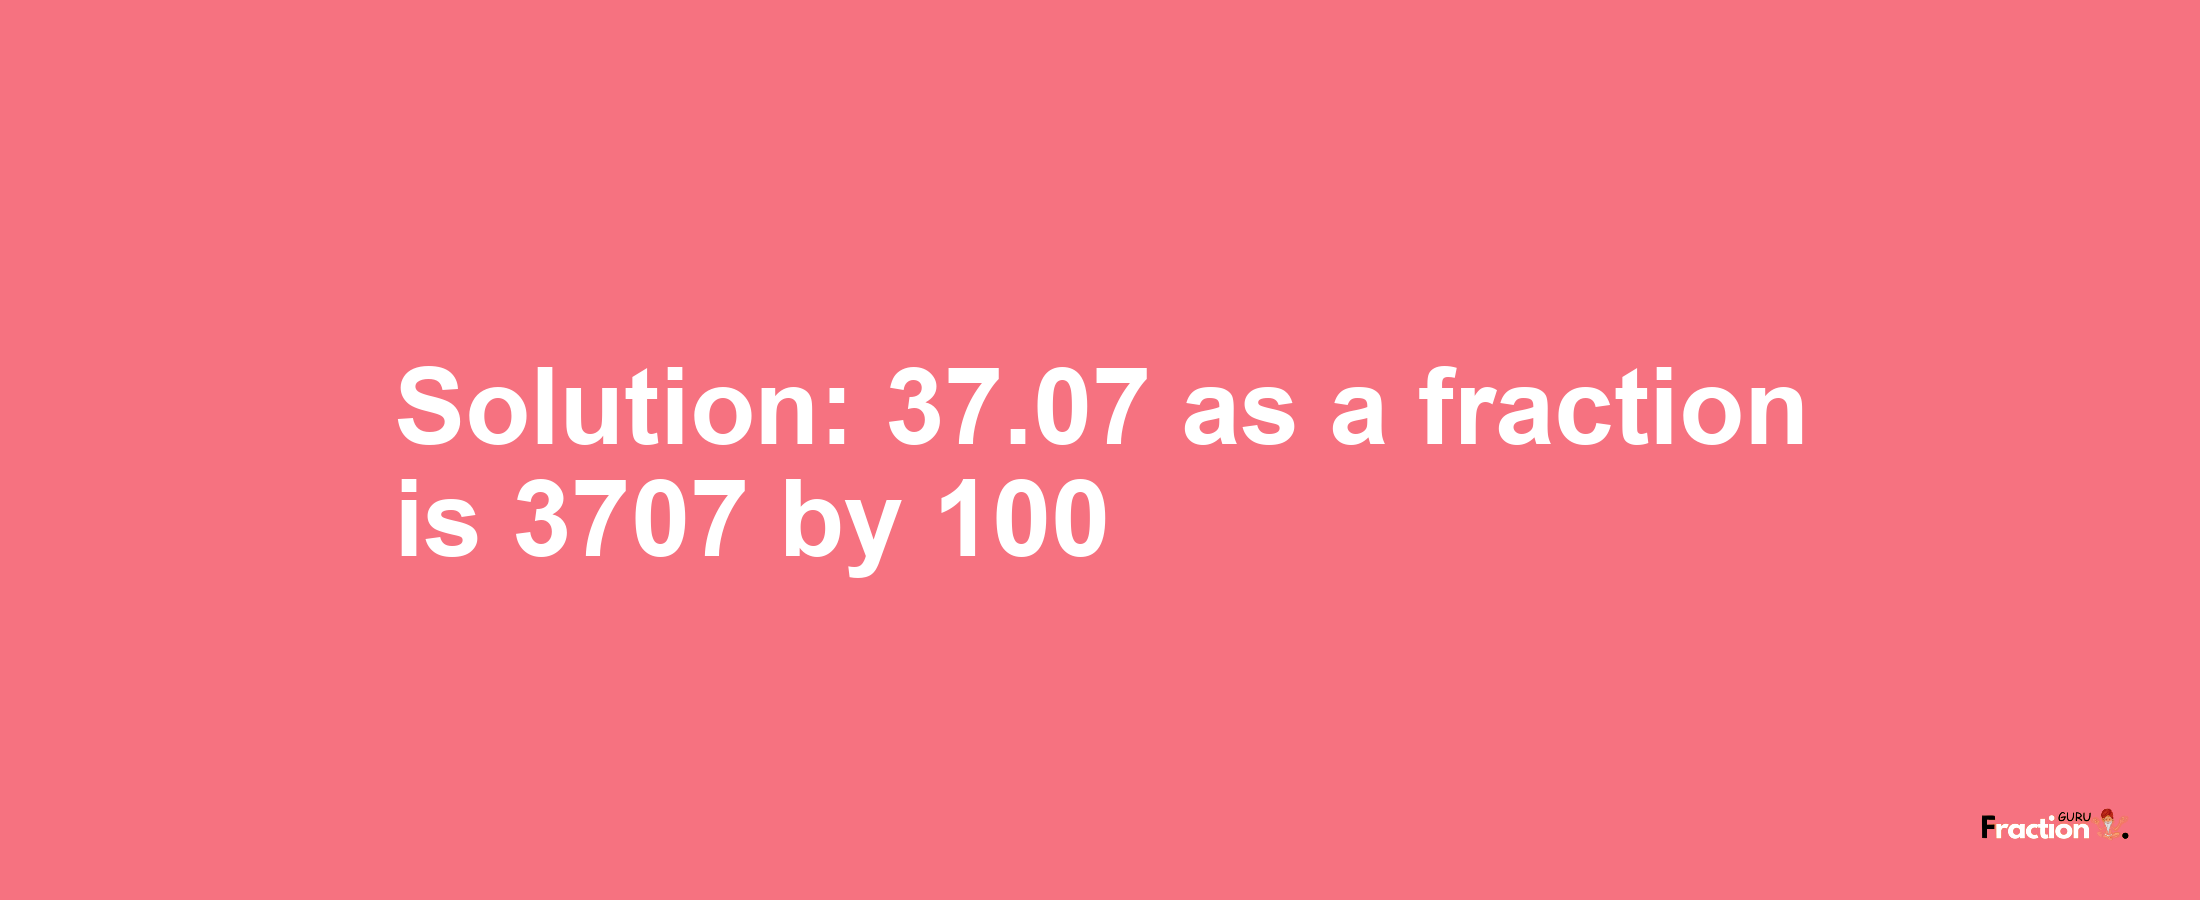 Solution:37.07 as a fraction is 3707/100